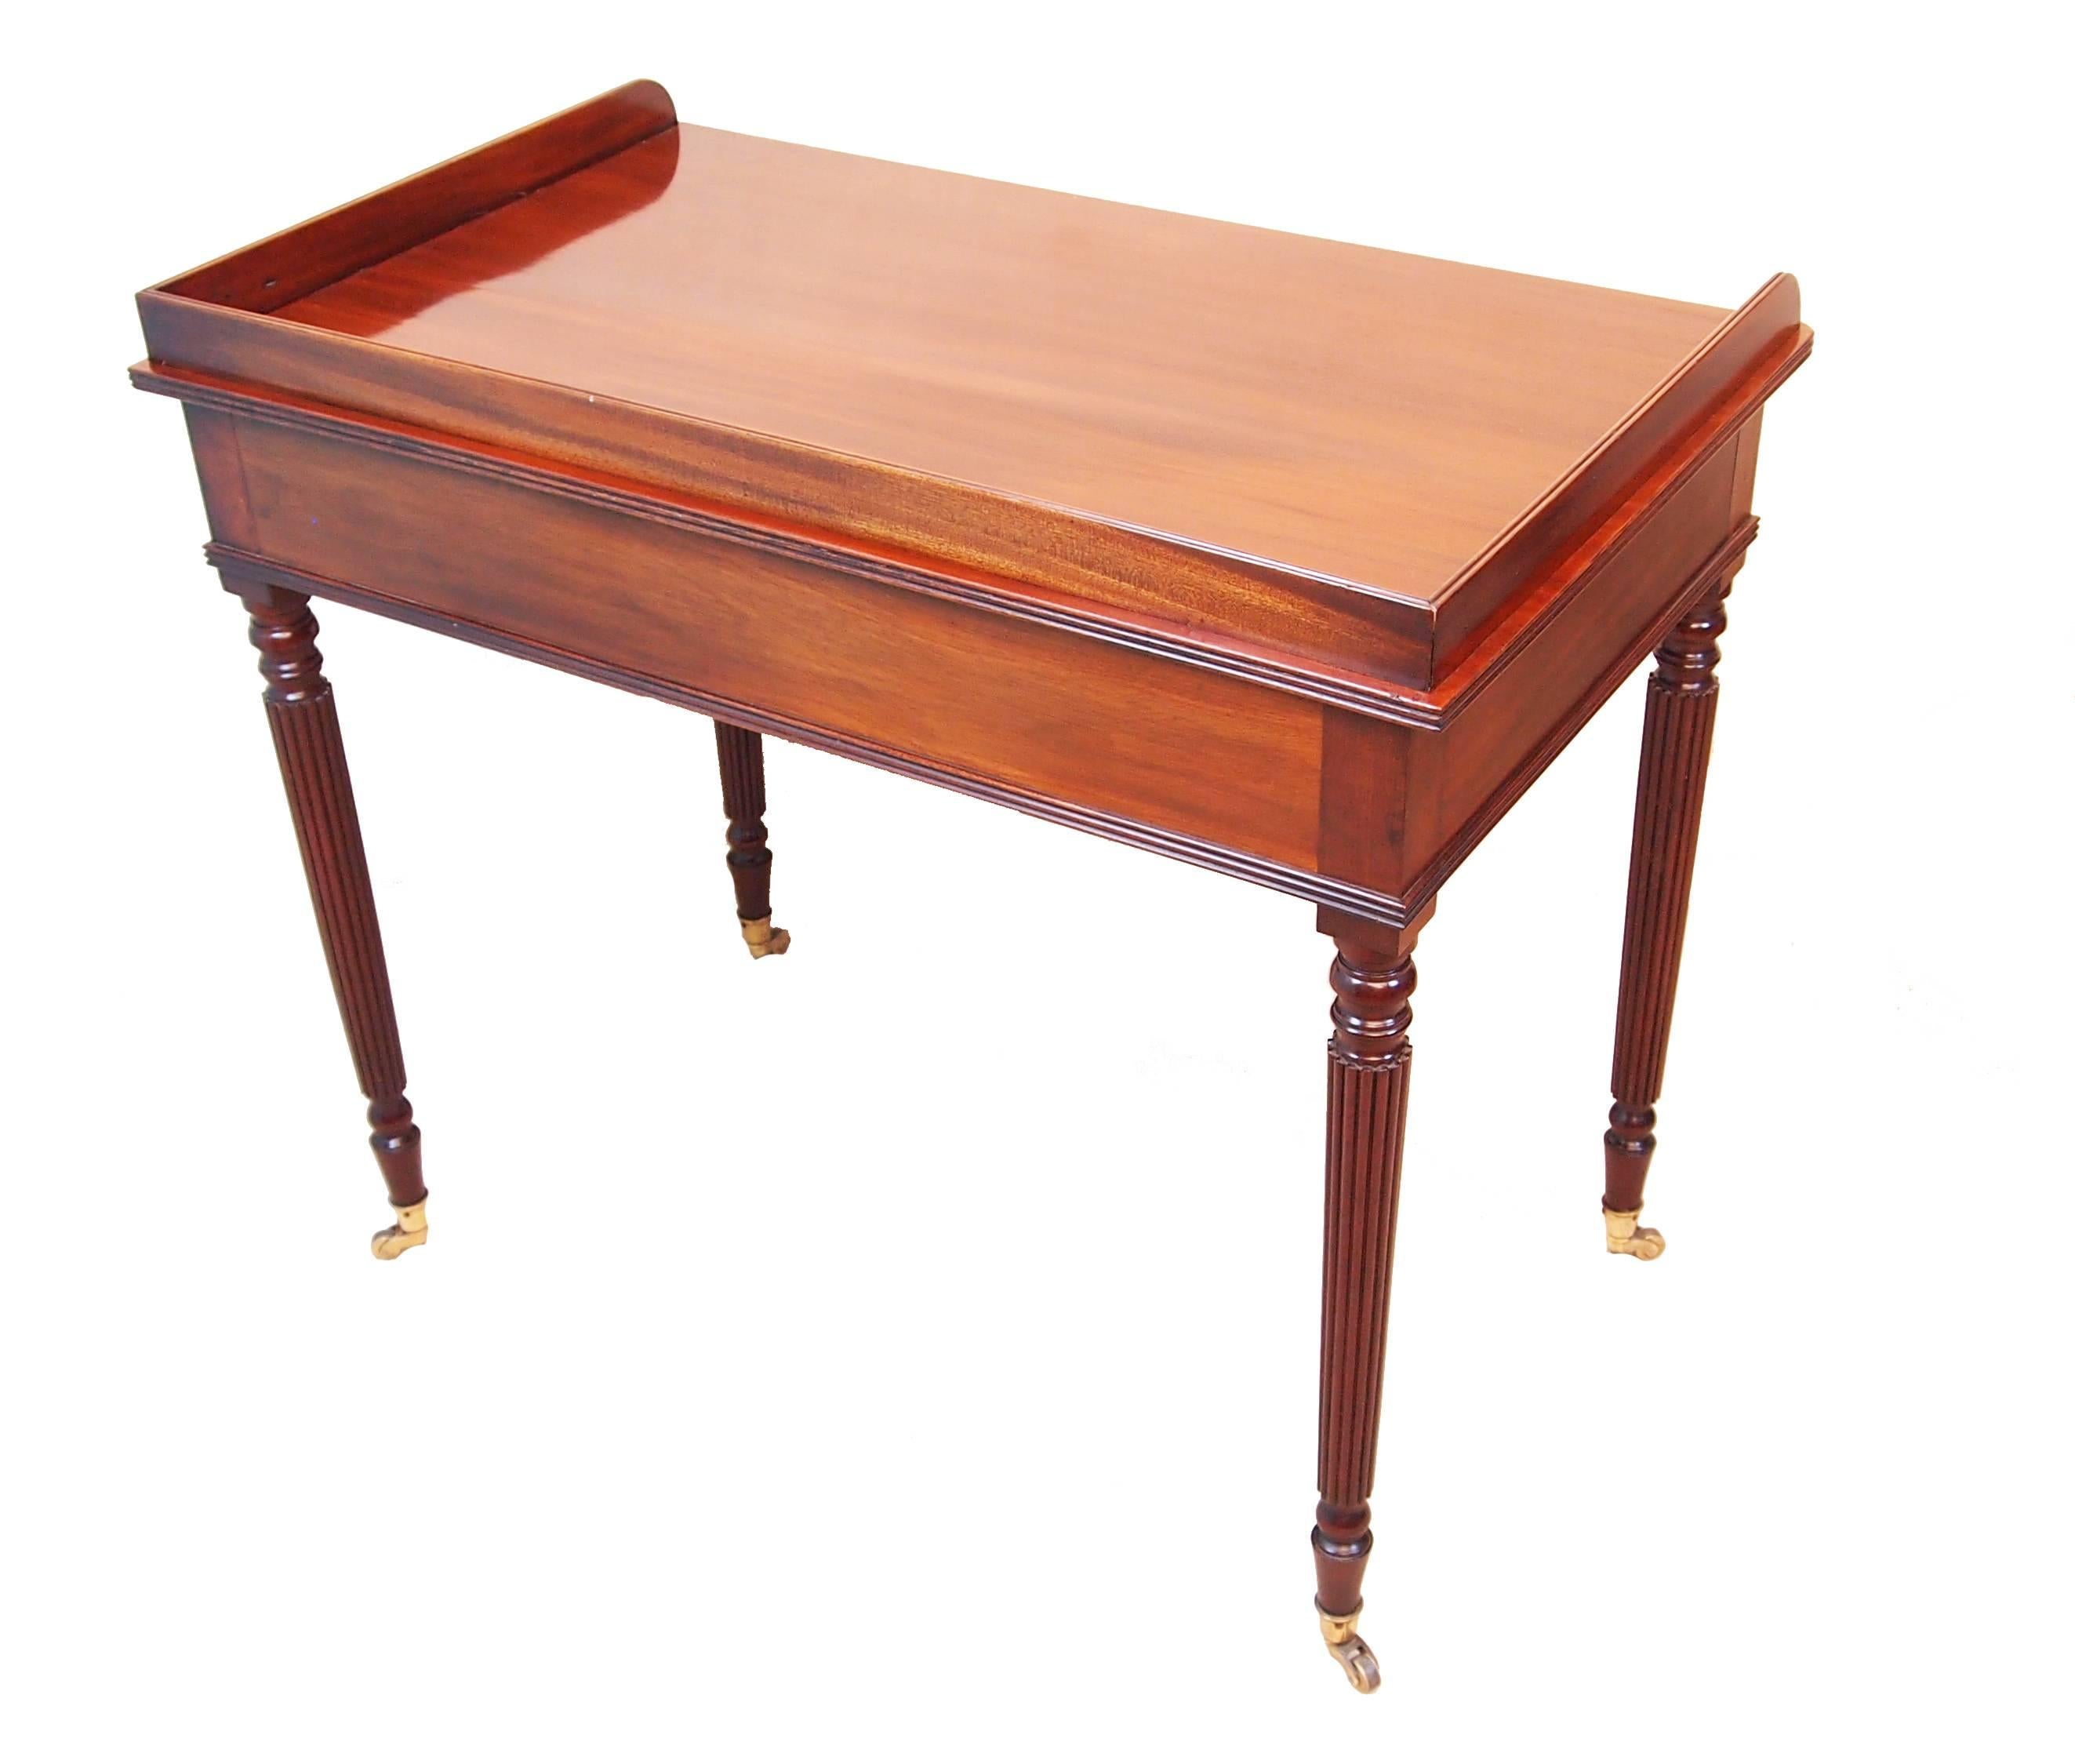 A fine quality Regency period mahogany dressing
Table having well figured gallery top above two
Frieze drawers raised on elegant turned and reeded
Tapering legs with original brass castors.